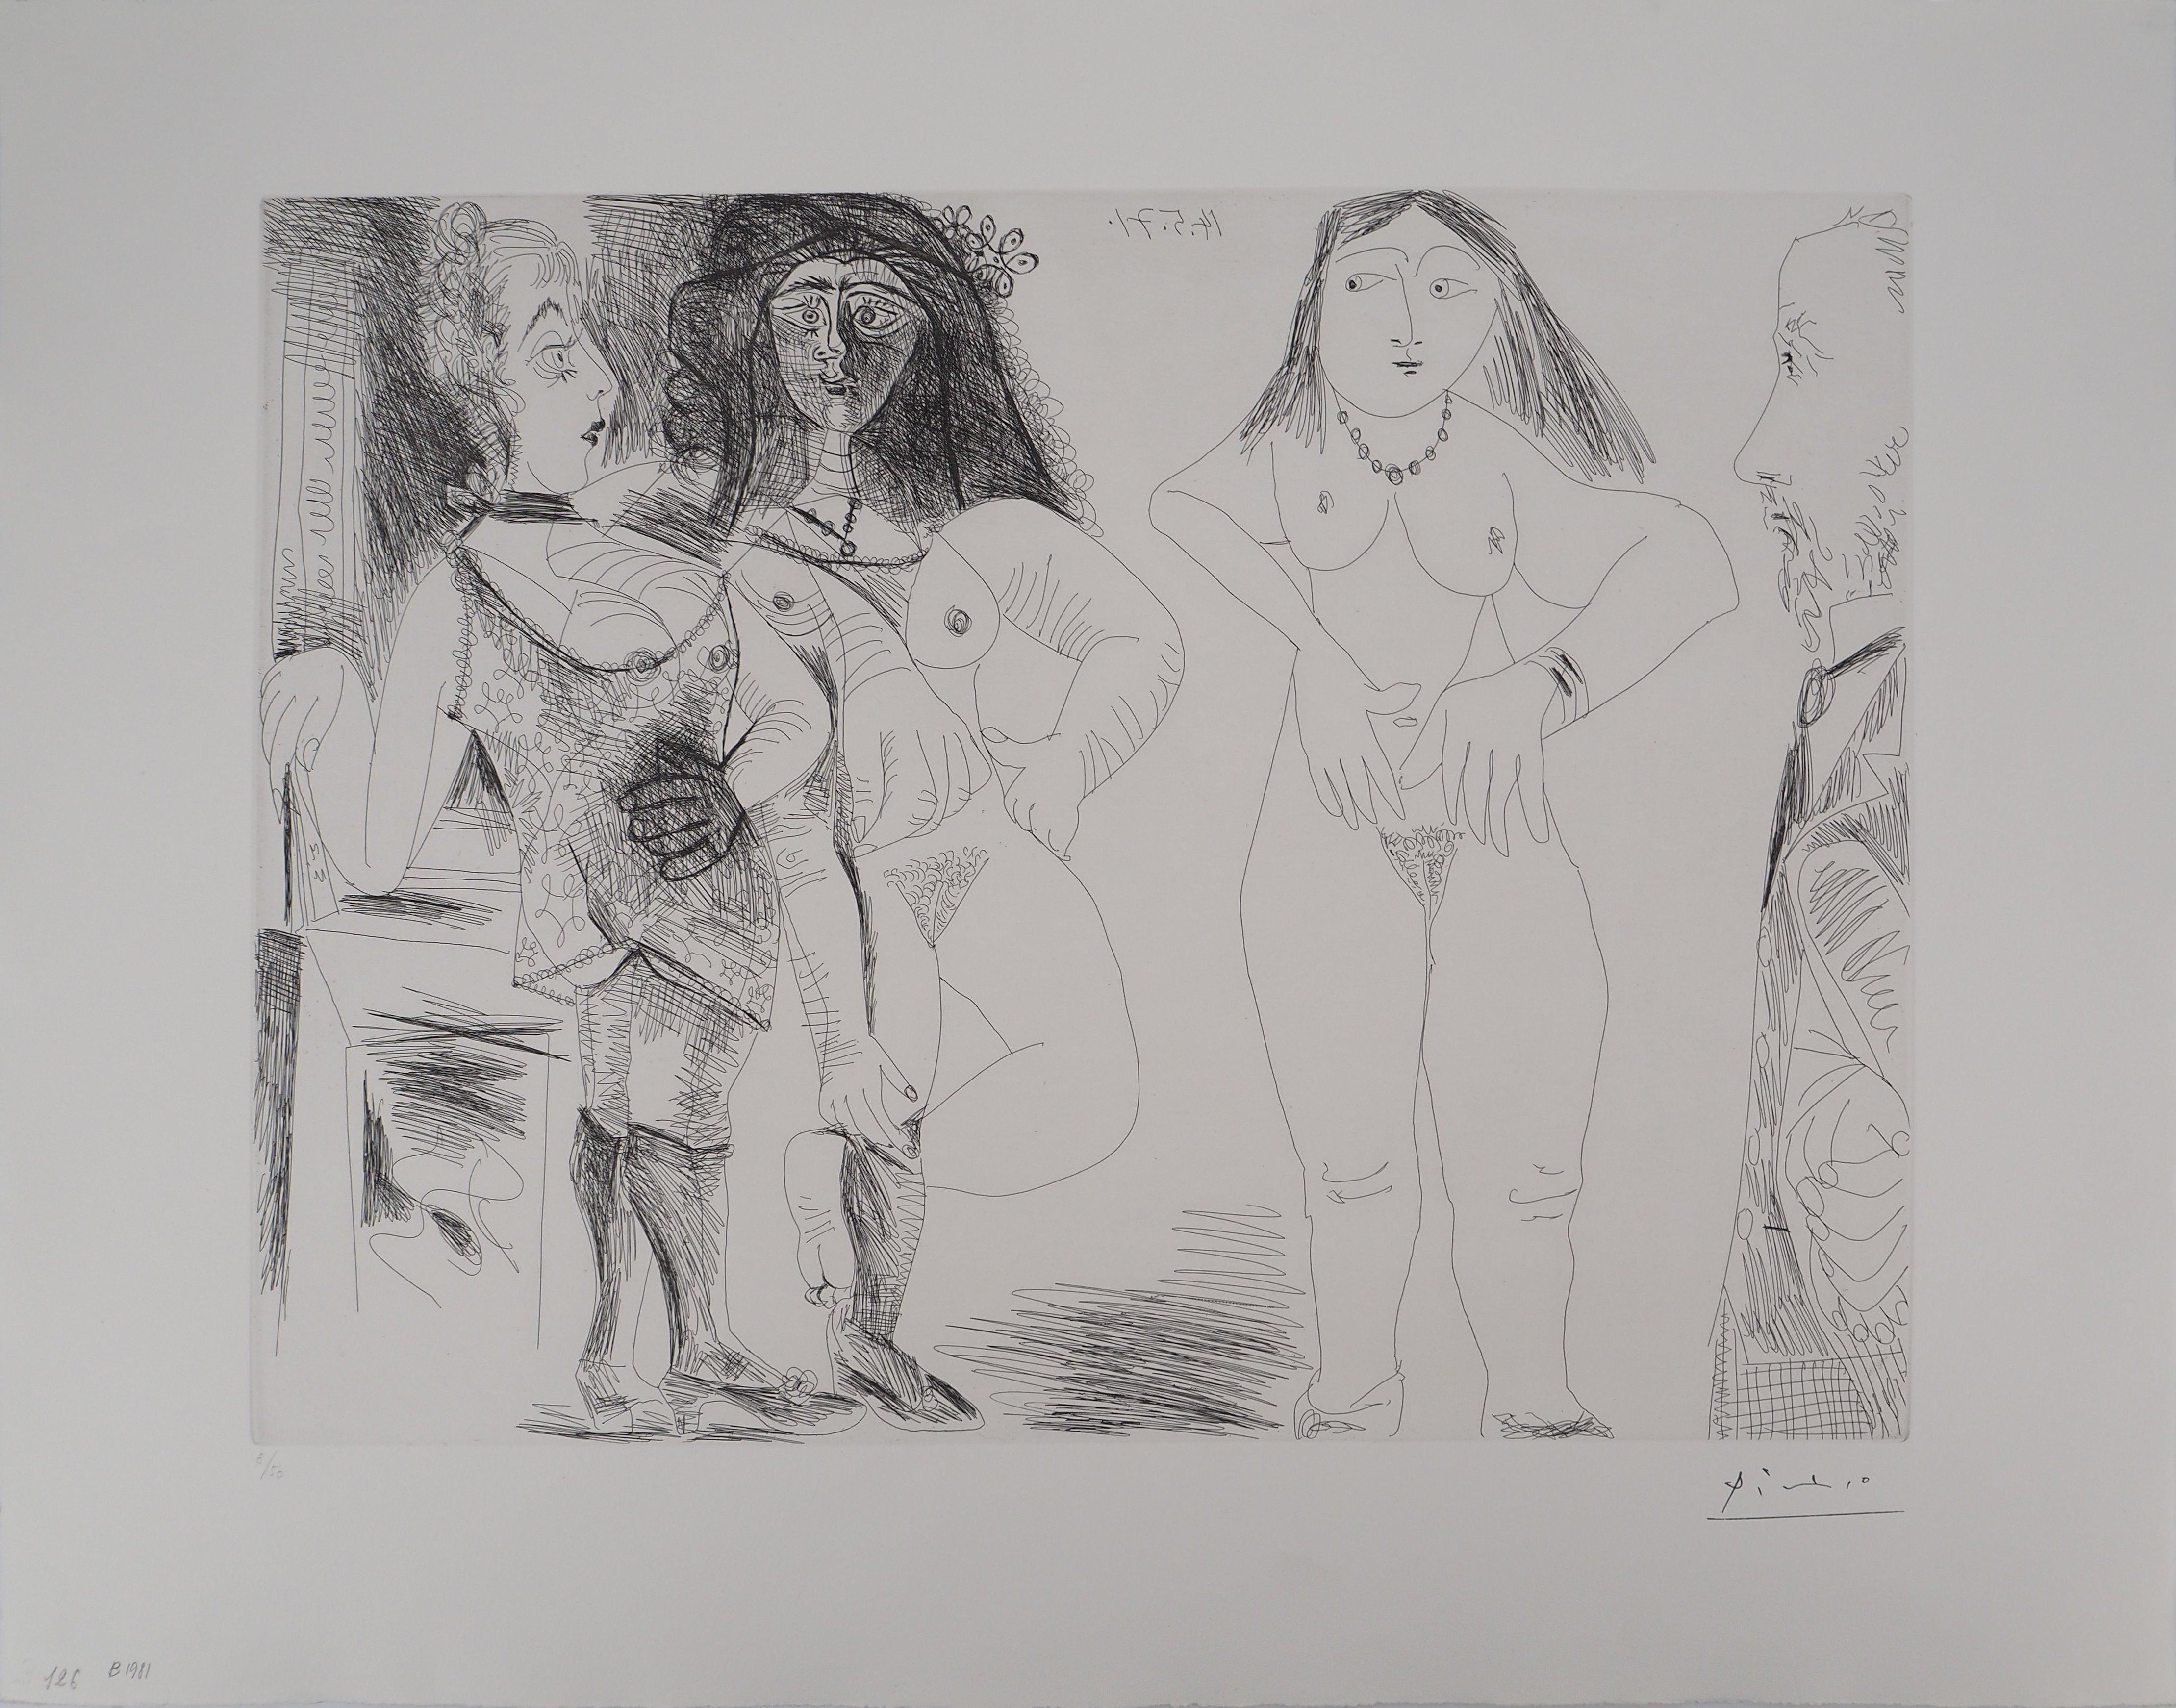 Pablo Picasso Figurative Print - Degas with Three Nude Women - Original etching, Signed (Bloch #1981)